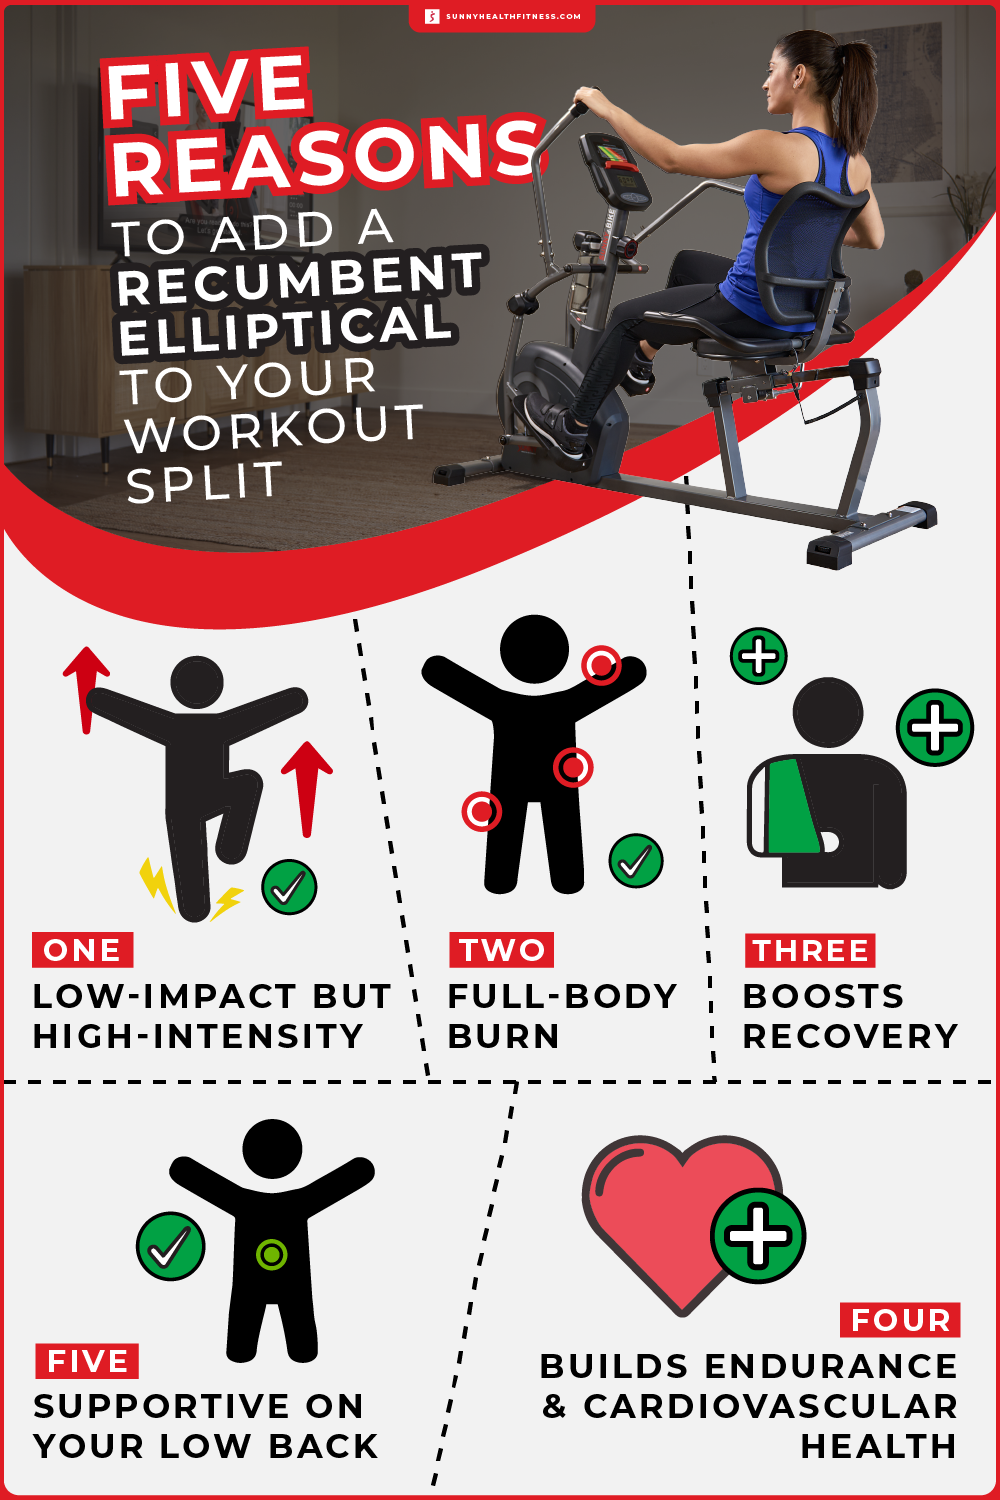 5 Reasons to Add a Recumbent Elliptical to Your Workout Split Infographic